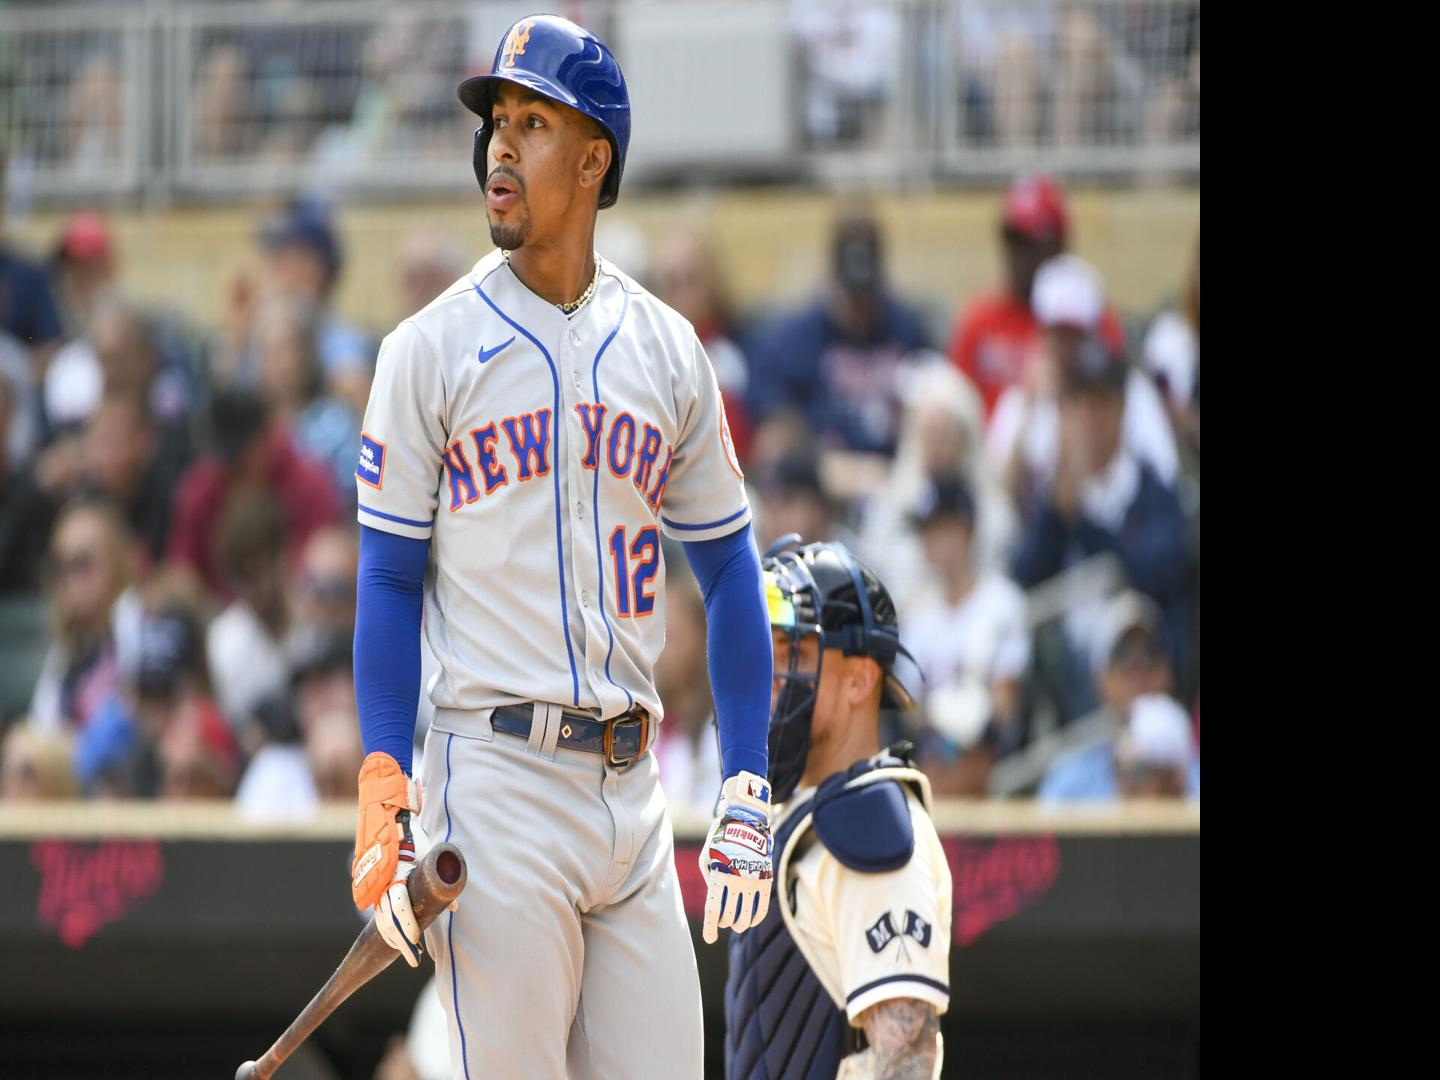 WATCH: Mets' Francisco Lindor hits Little League home run for Puerto Rico